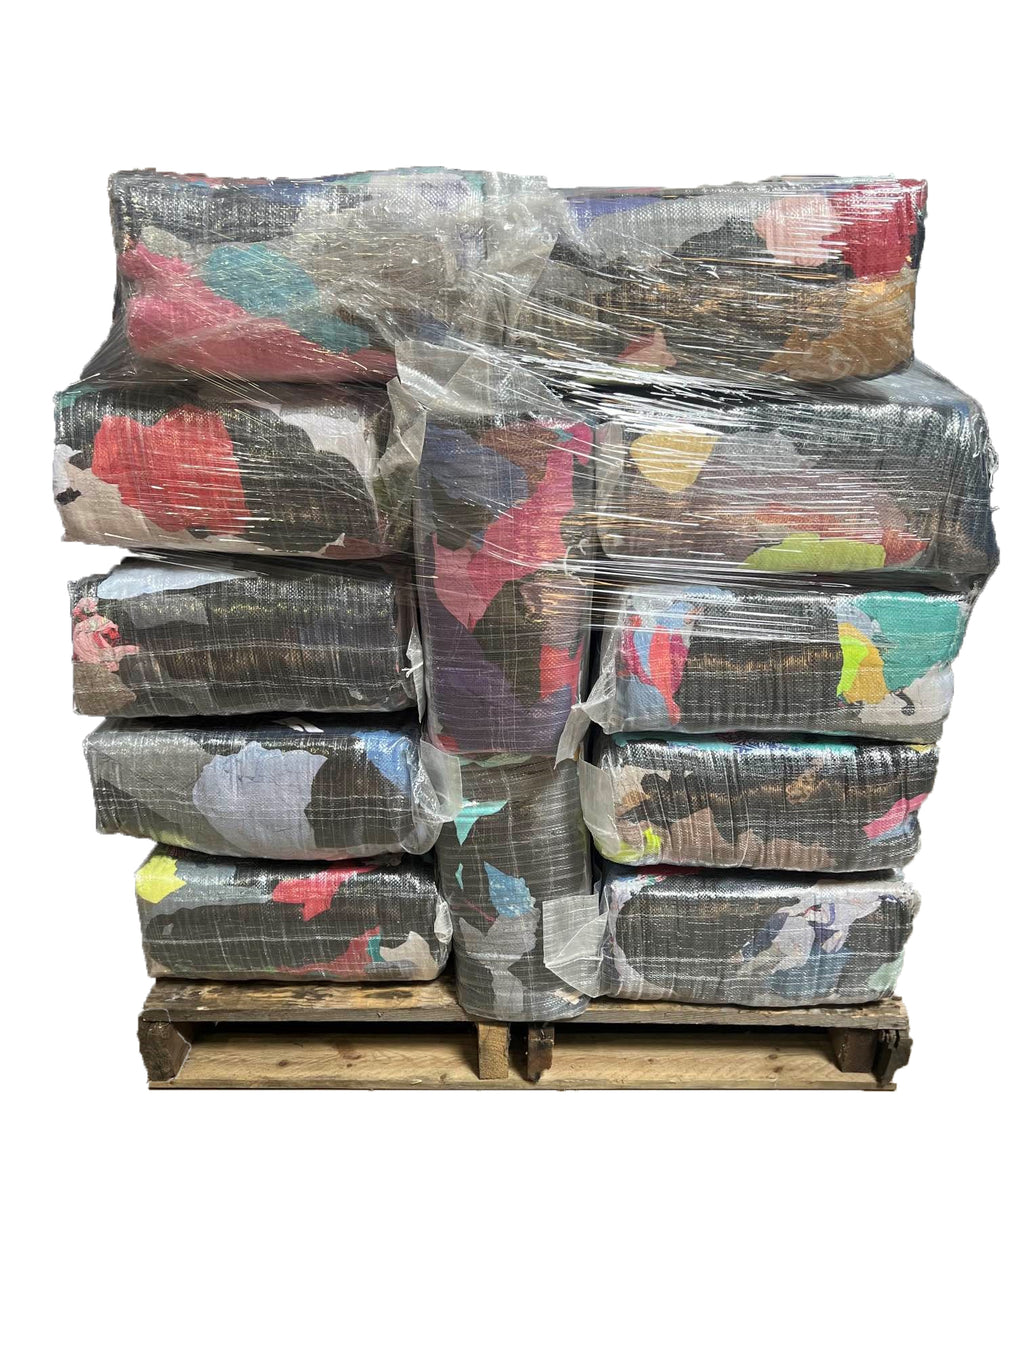 Color Knit T-Shirt 100% Cotton Cleaning Rags 600 lbs. PALLET- 36x25 lbs bags - Multipurpose Cleaning